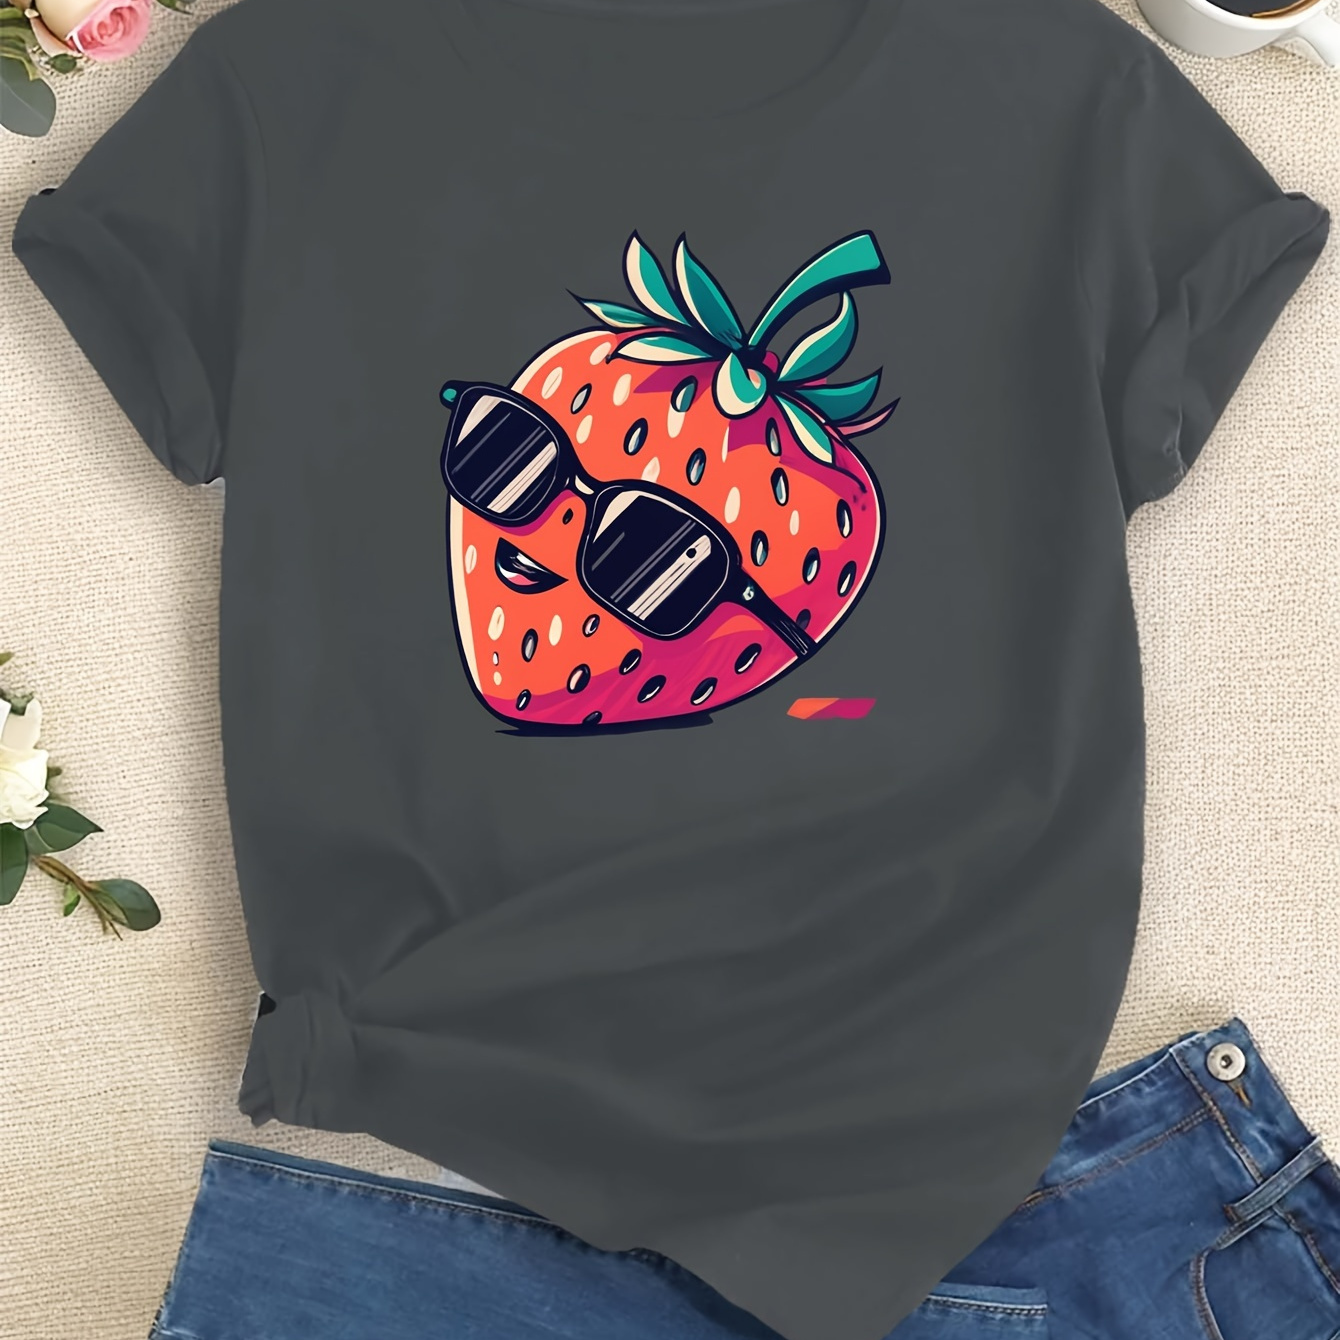 

Cute Strawberry With Glasses Print T-shirt, Short Sleeve Crew Neck Casual Top For Summer & Spring, Women's Clothing